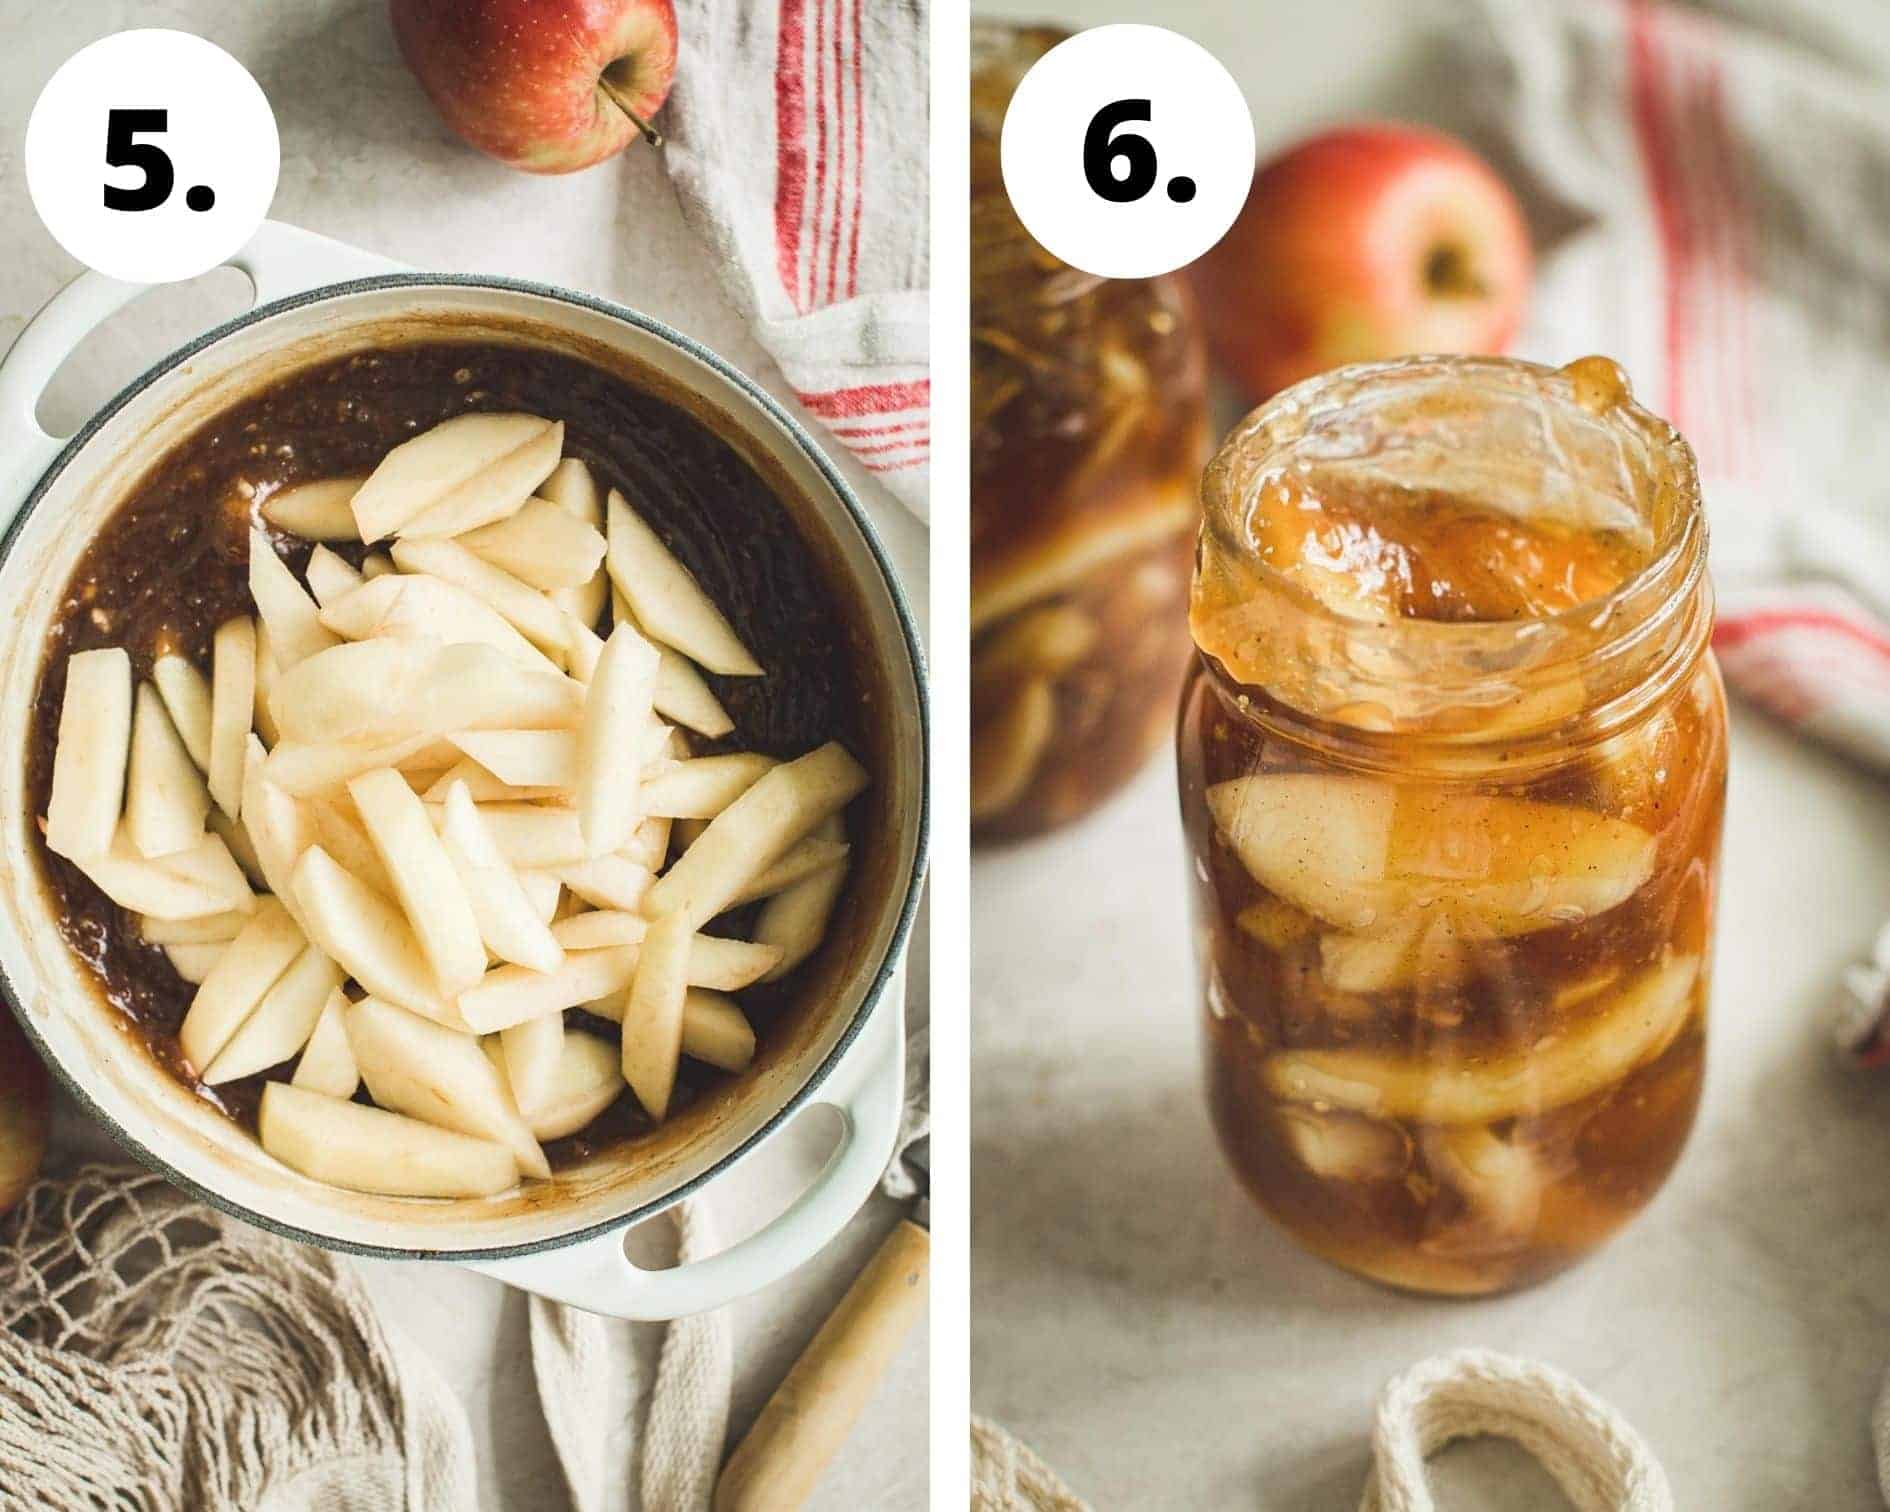 Homemade apple pie process steps 5 and 6.